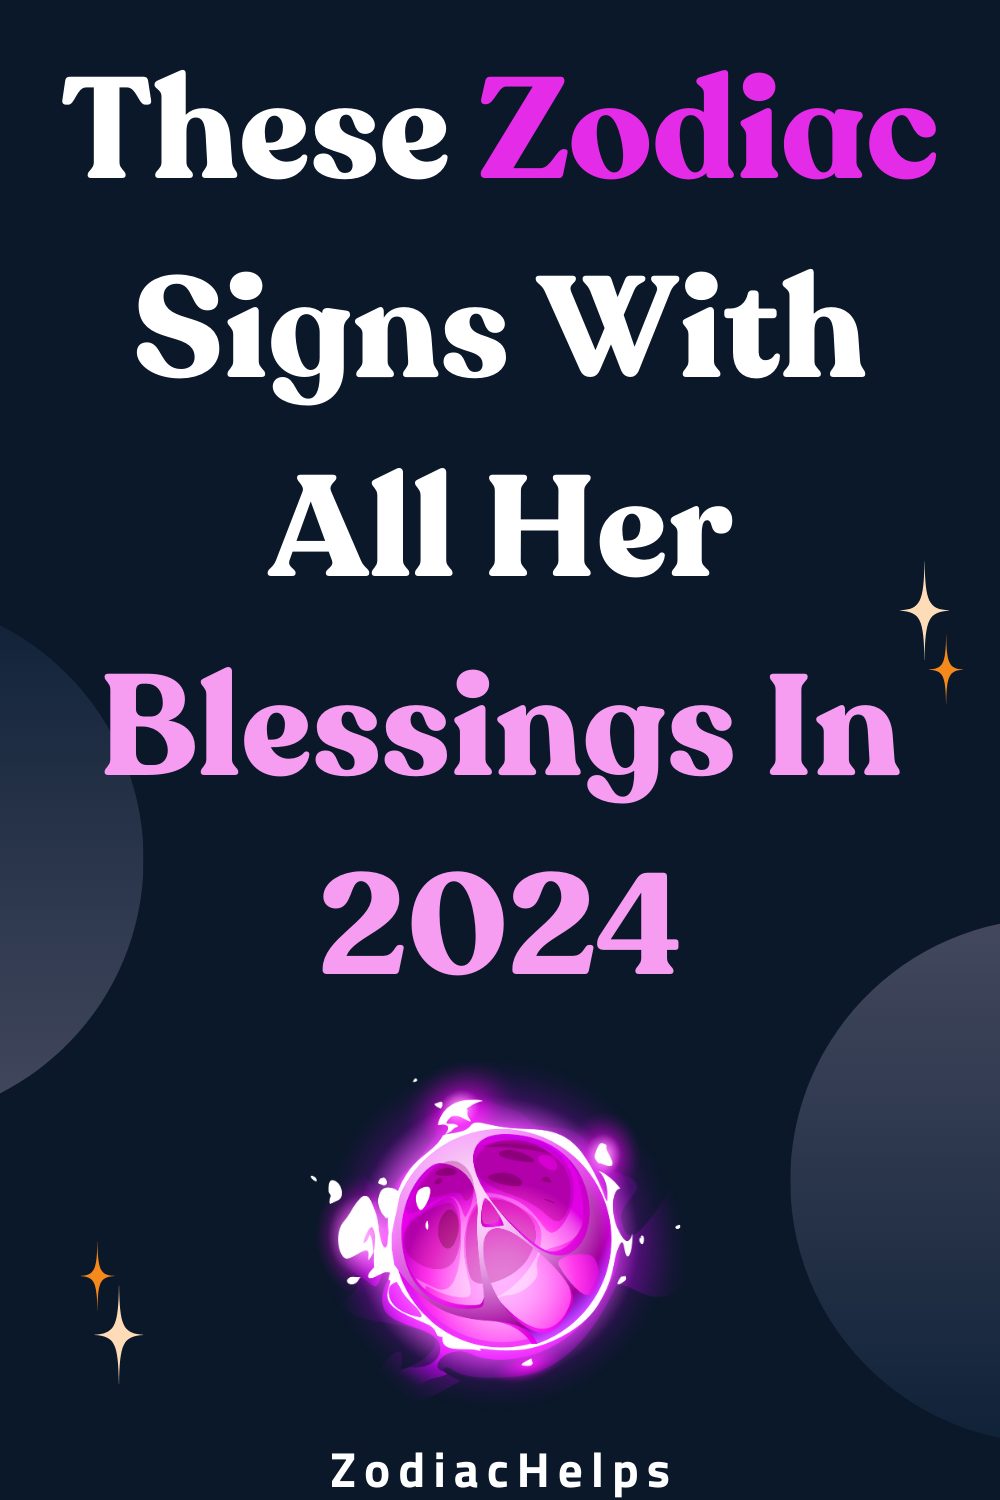 These Zodiac Signs With All Her Blessings In 2024